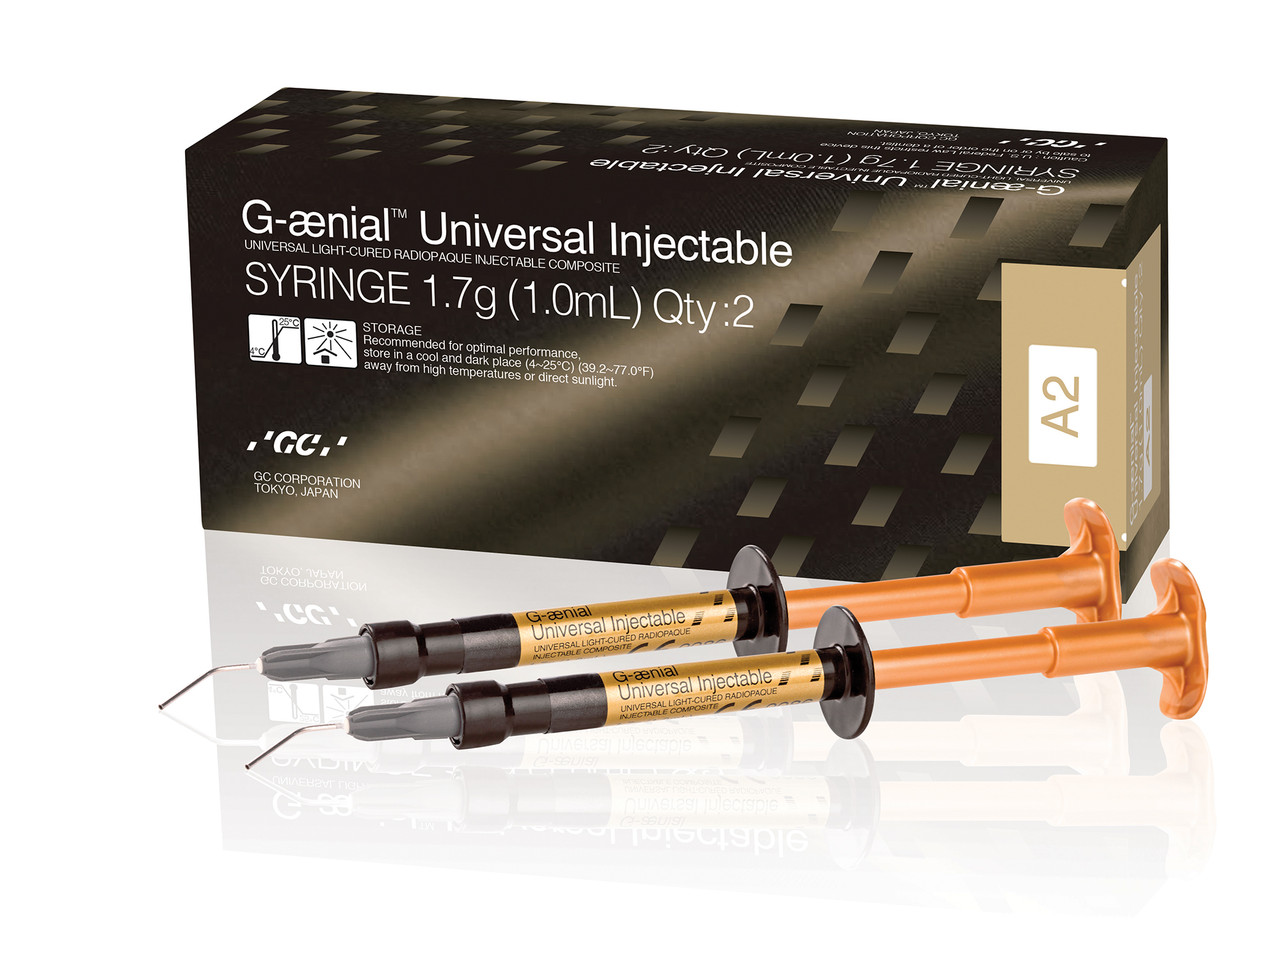 G-aenial Universal Injectable Unitips 15 x 0.16mL A2